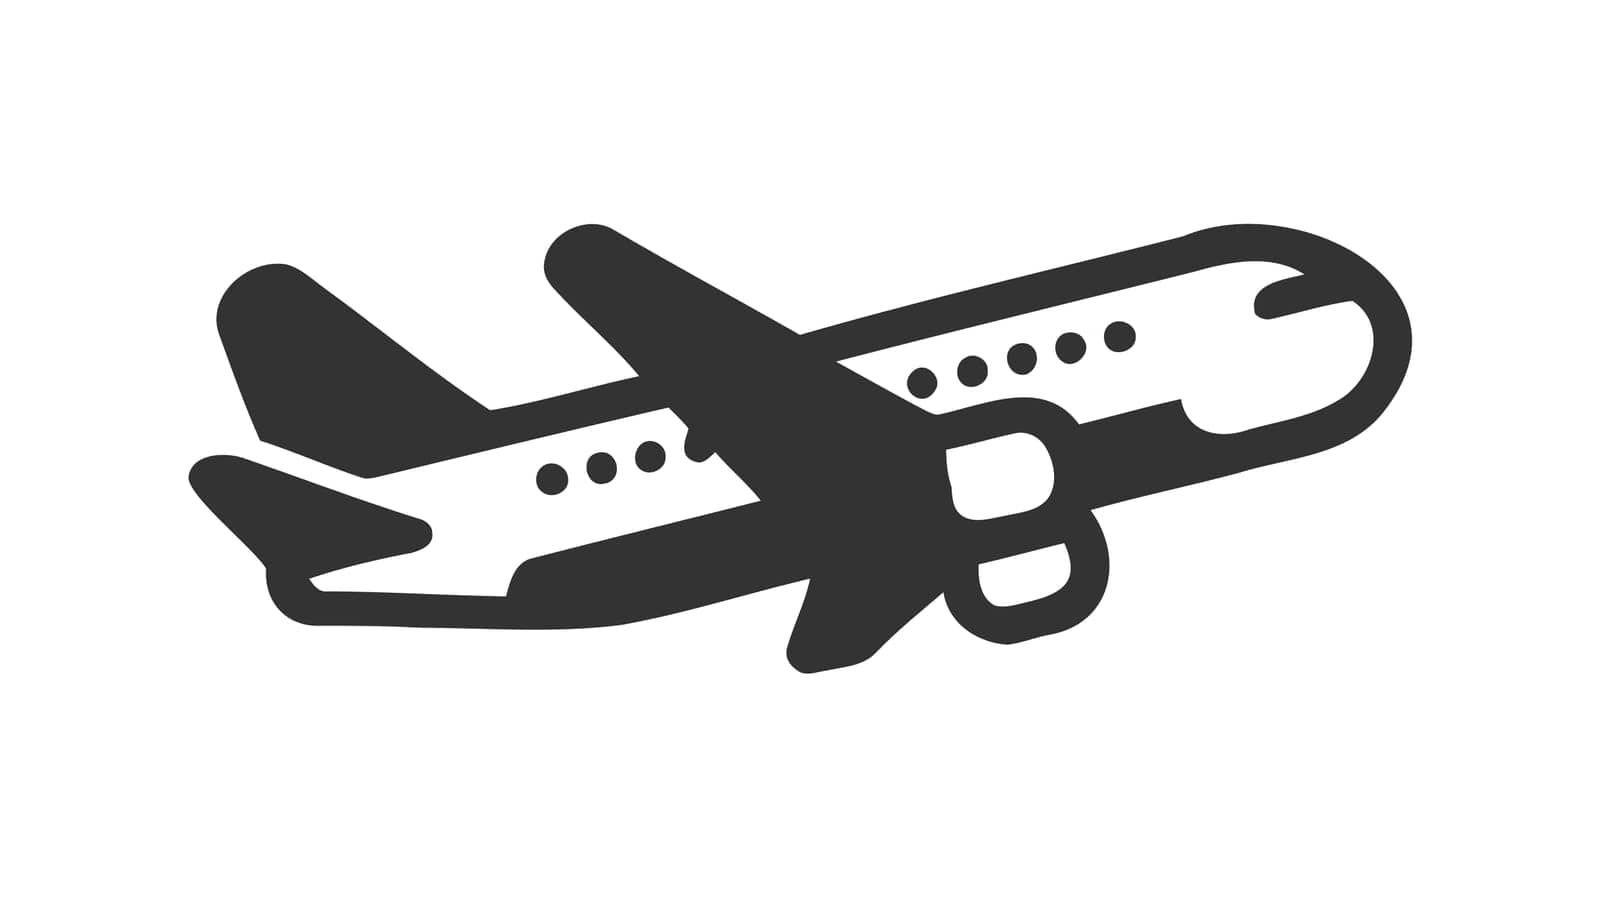 Plane icon vector, solid illustration, pictogram isolated on white.